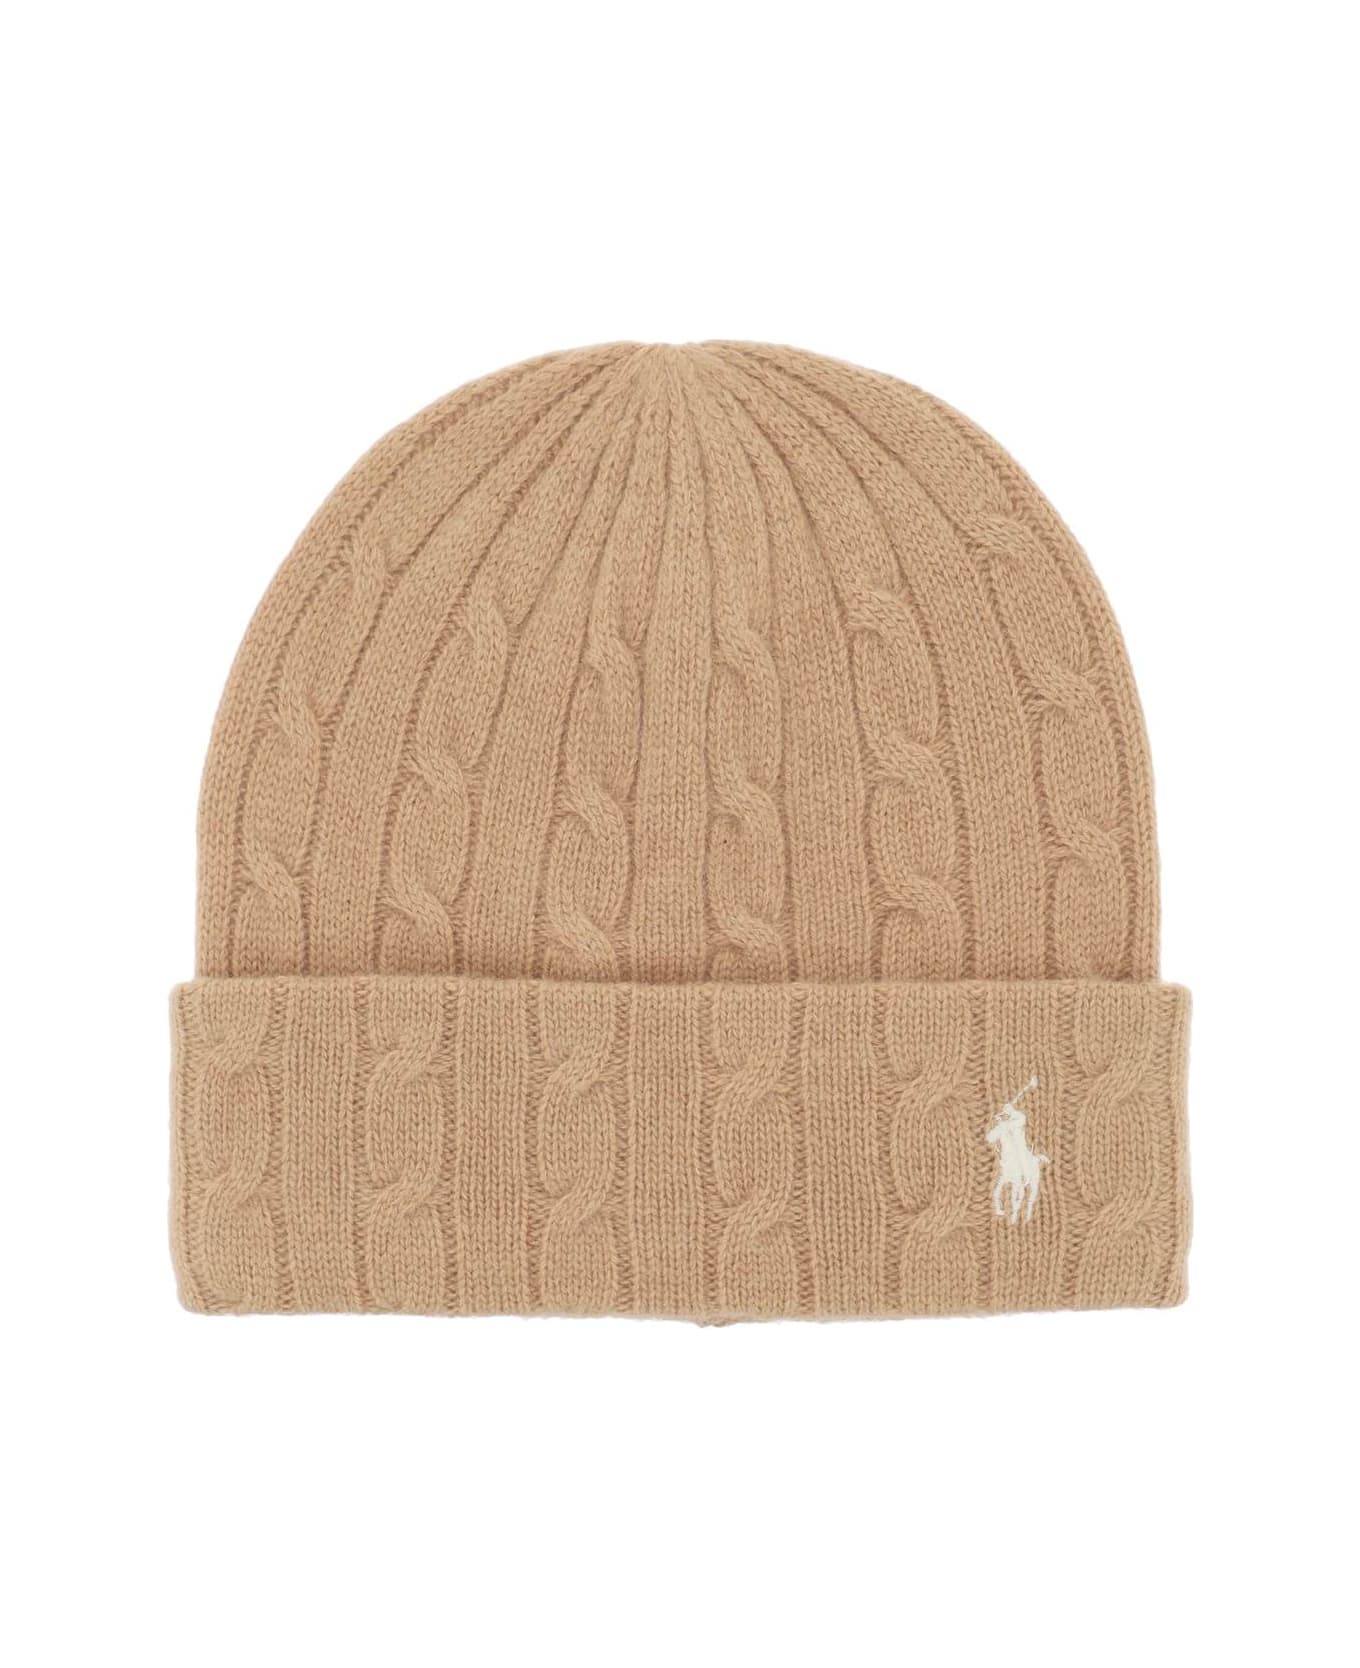 Polo Ralph Lauren Cable-knit Cashmere And Wool Beanie Hat - CAMEL (Beige)